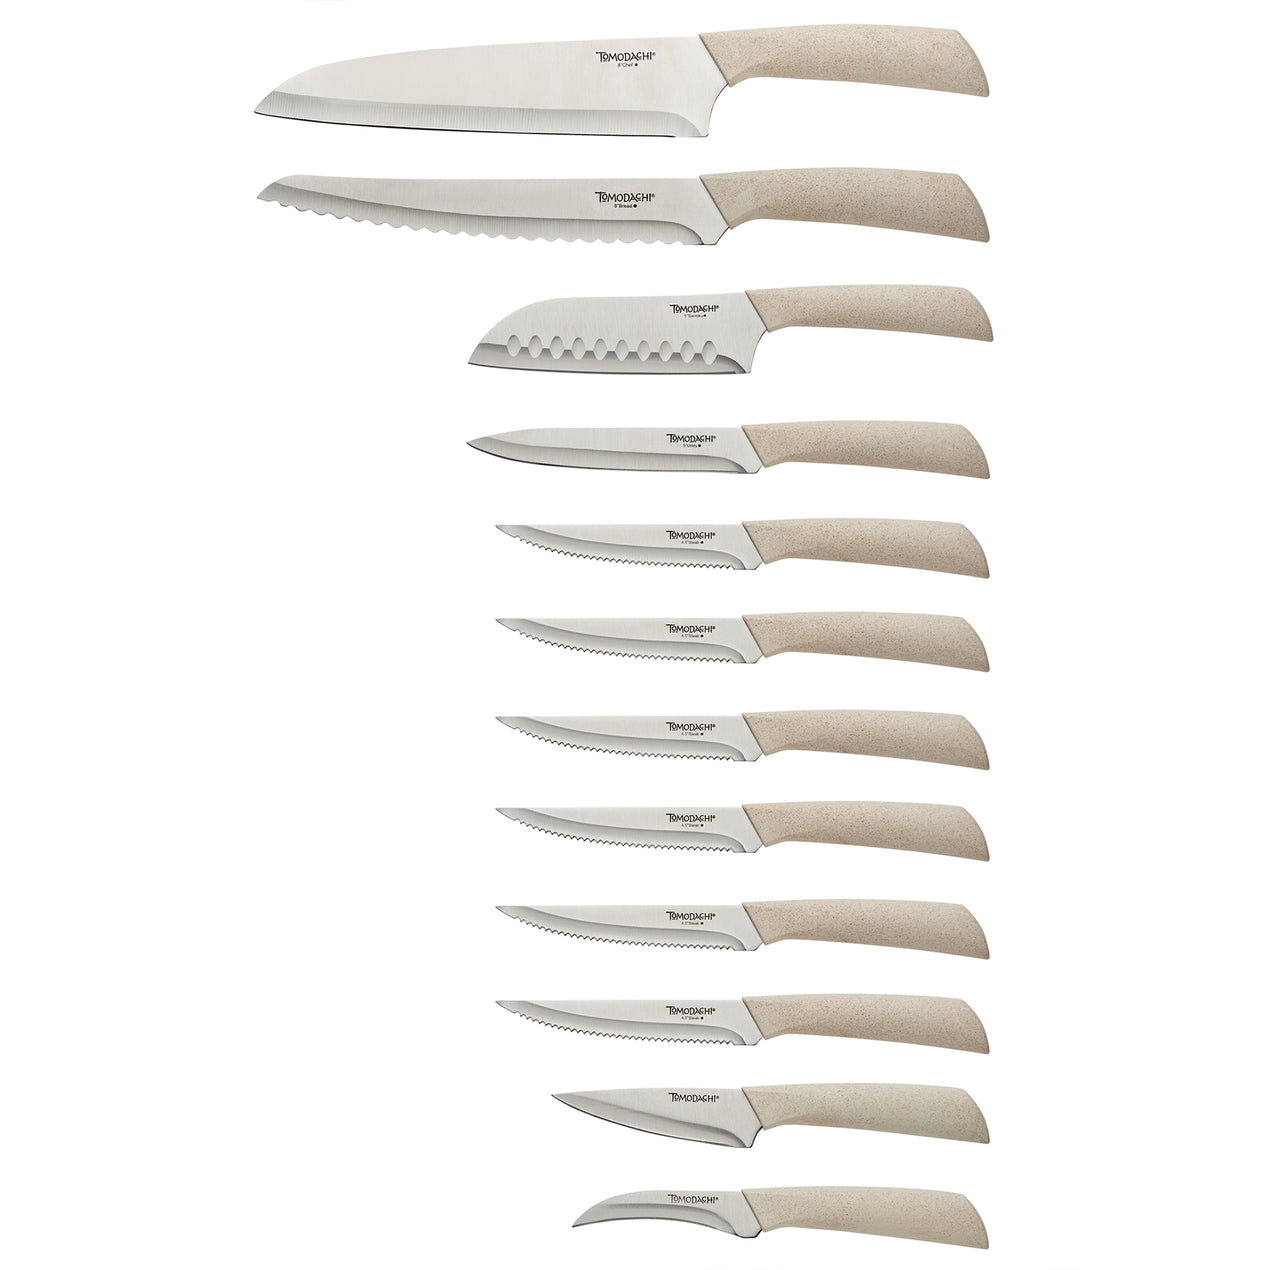  HARVEST 3PC CUTLERY W GUARDS: Home & Kitchen